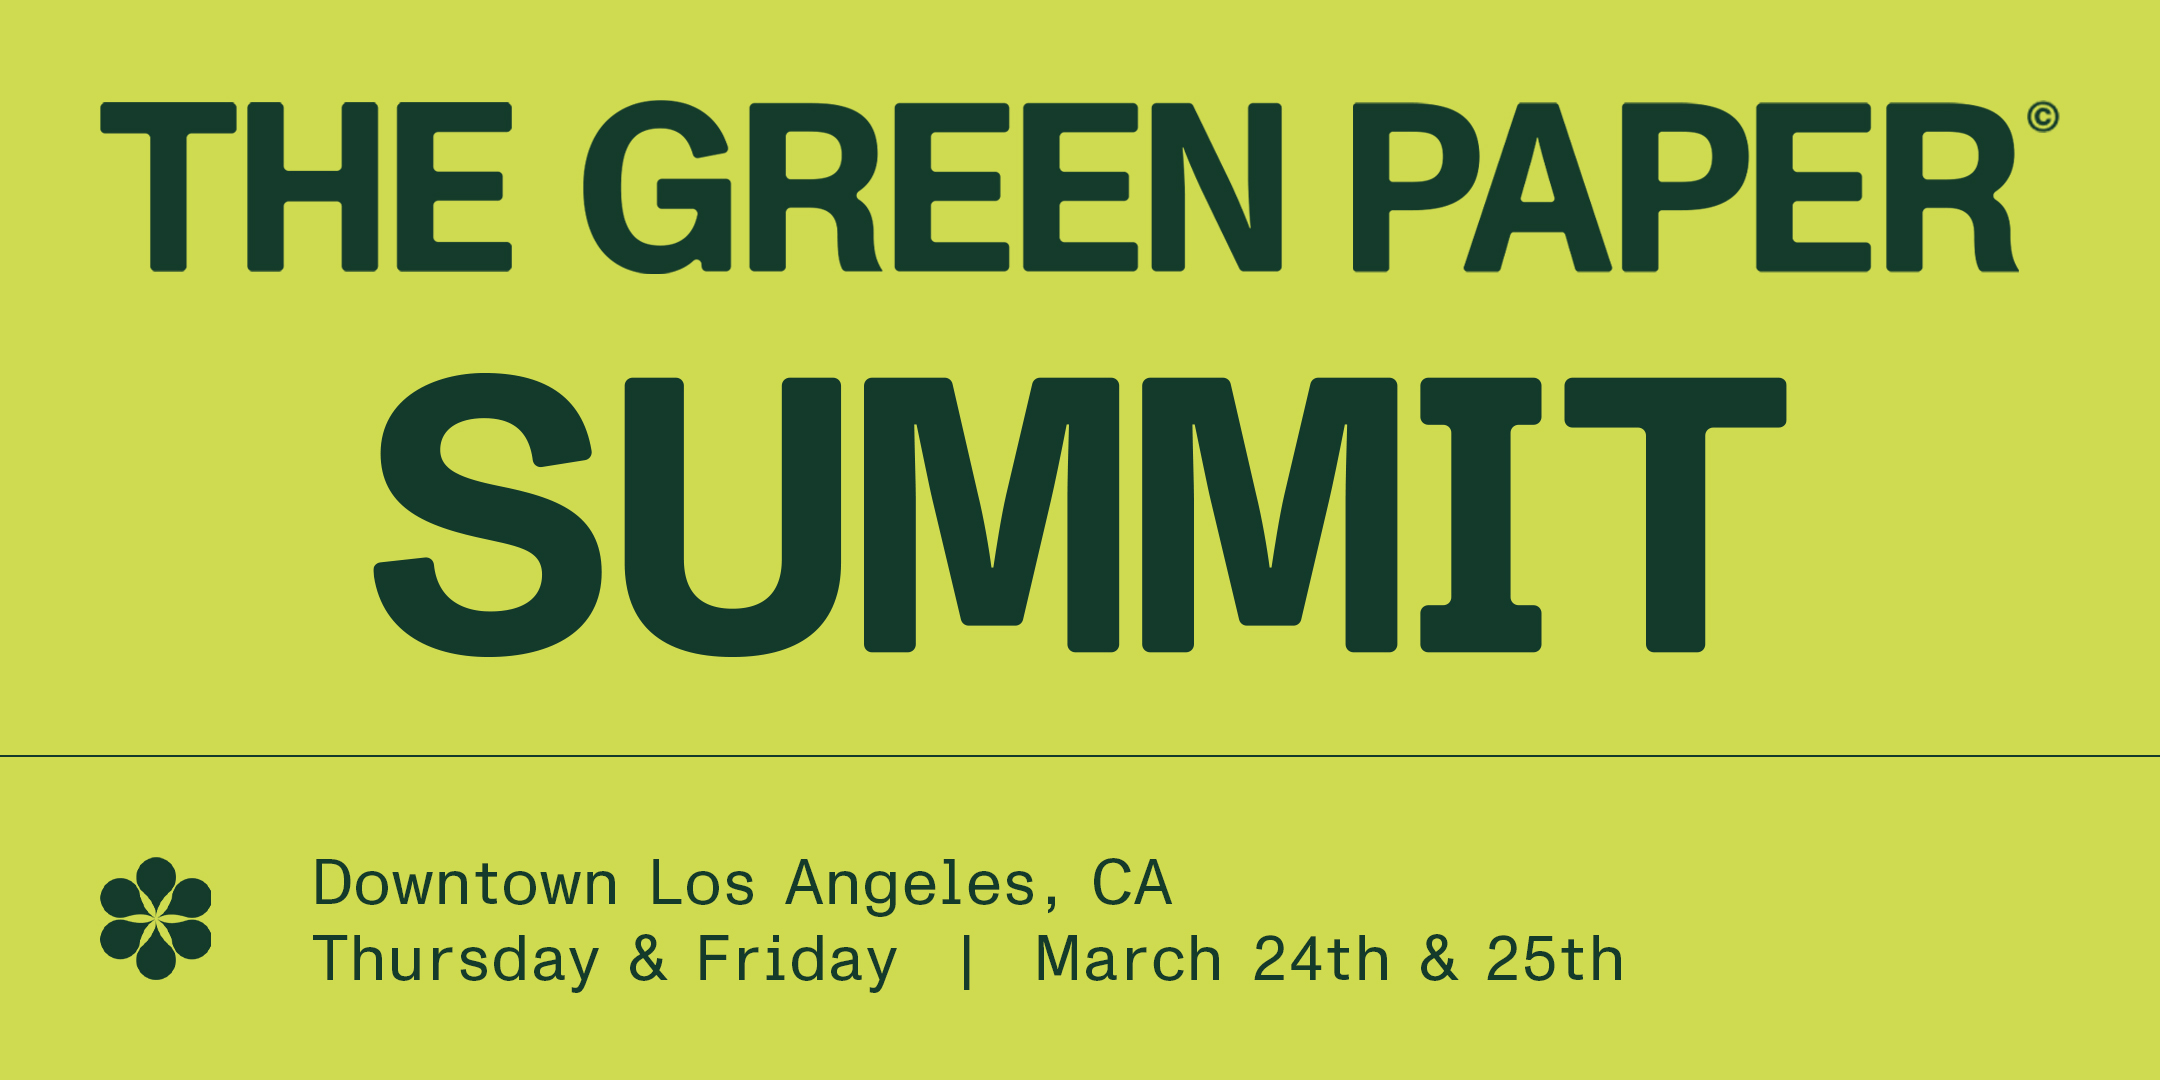 The Green Paper Summit - Event Page1